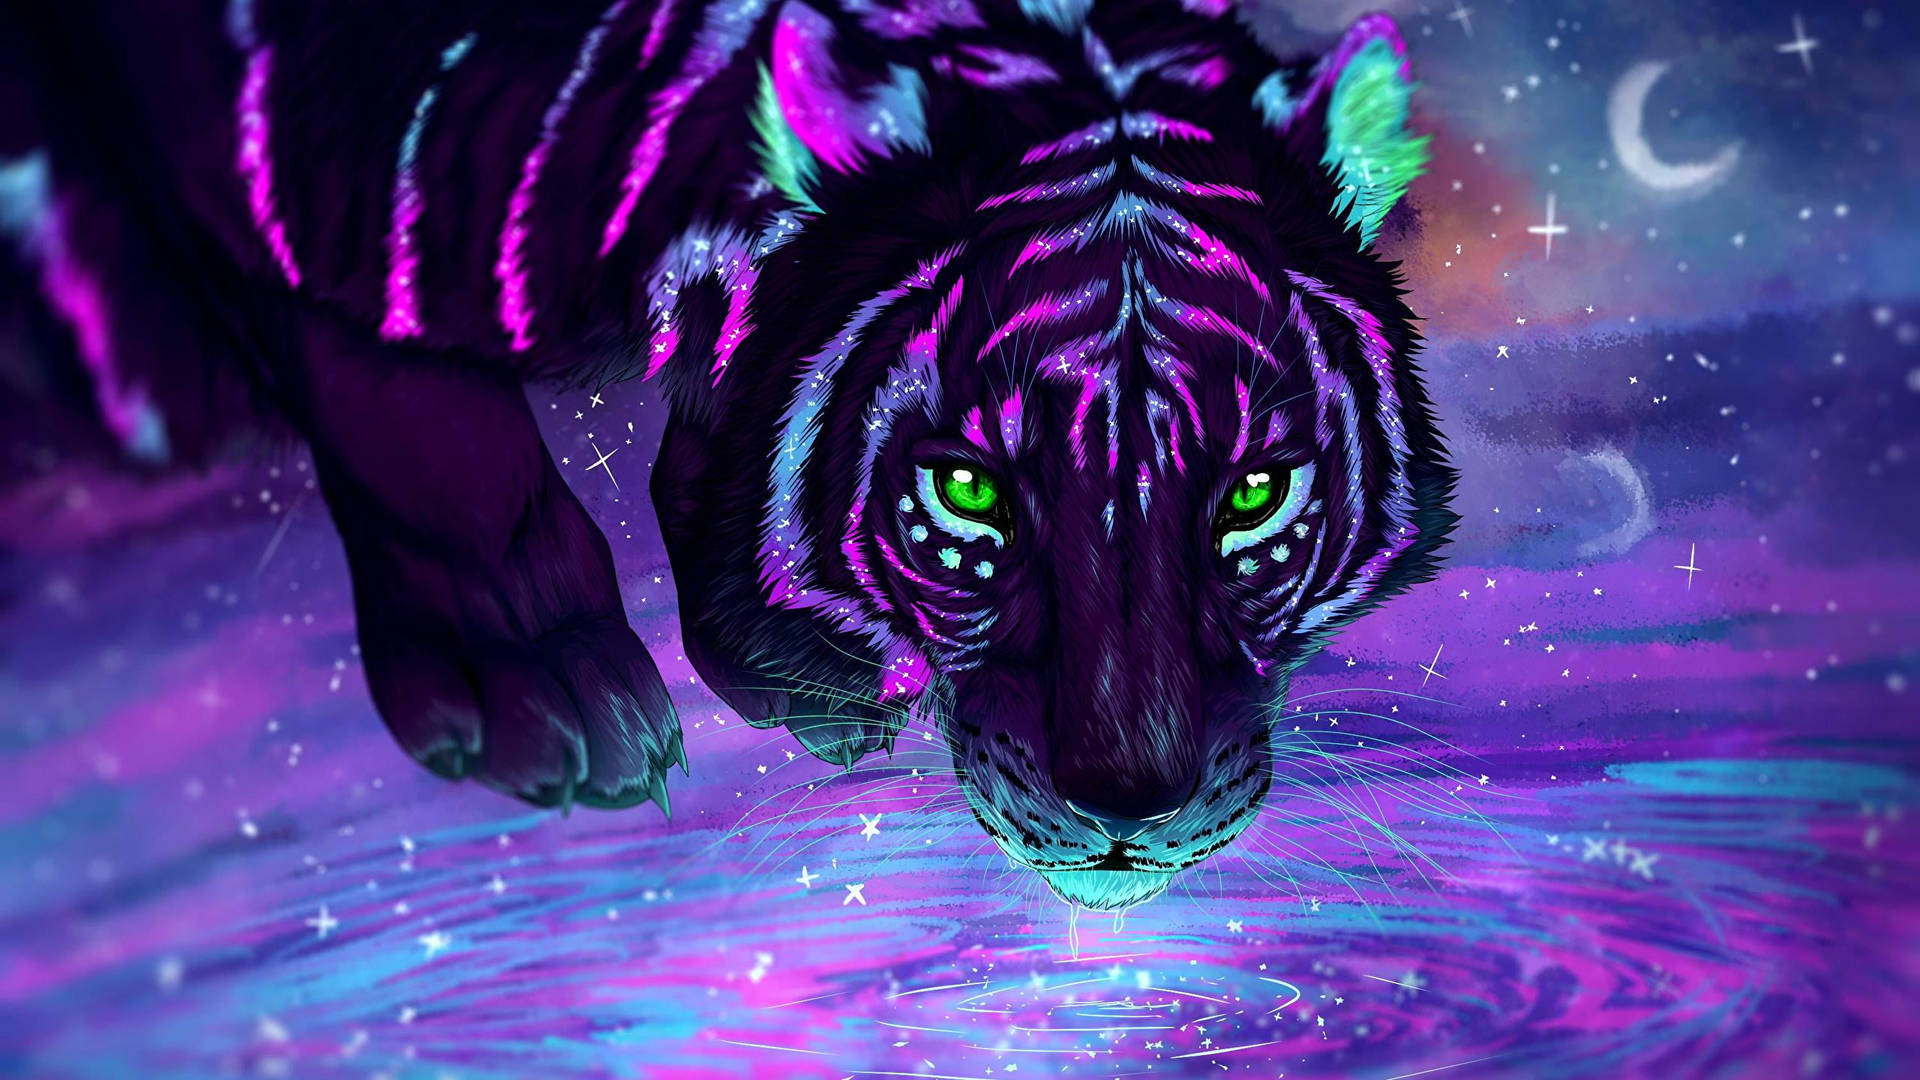 Tiger Artwork In Neon Aesthetic Background